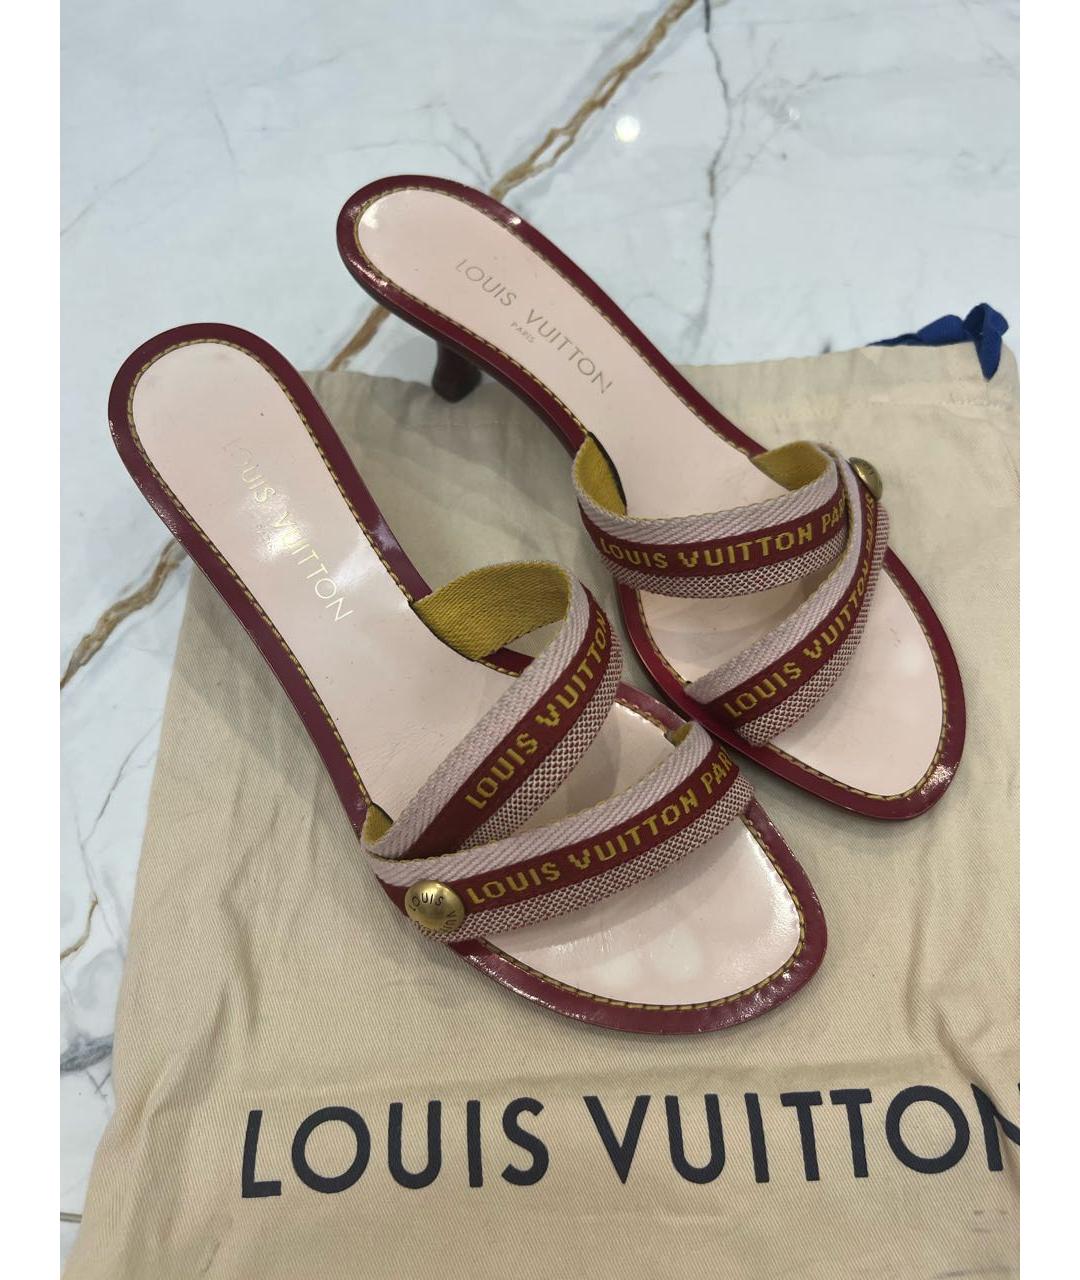 LOUIS VUITTON PRE-OWNED Мульти текстильные мюли, фото 2